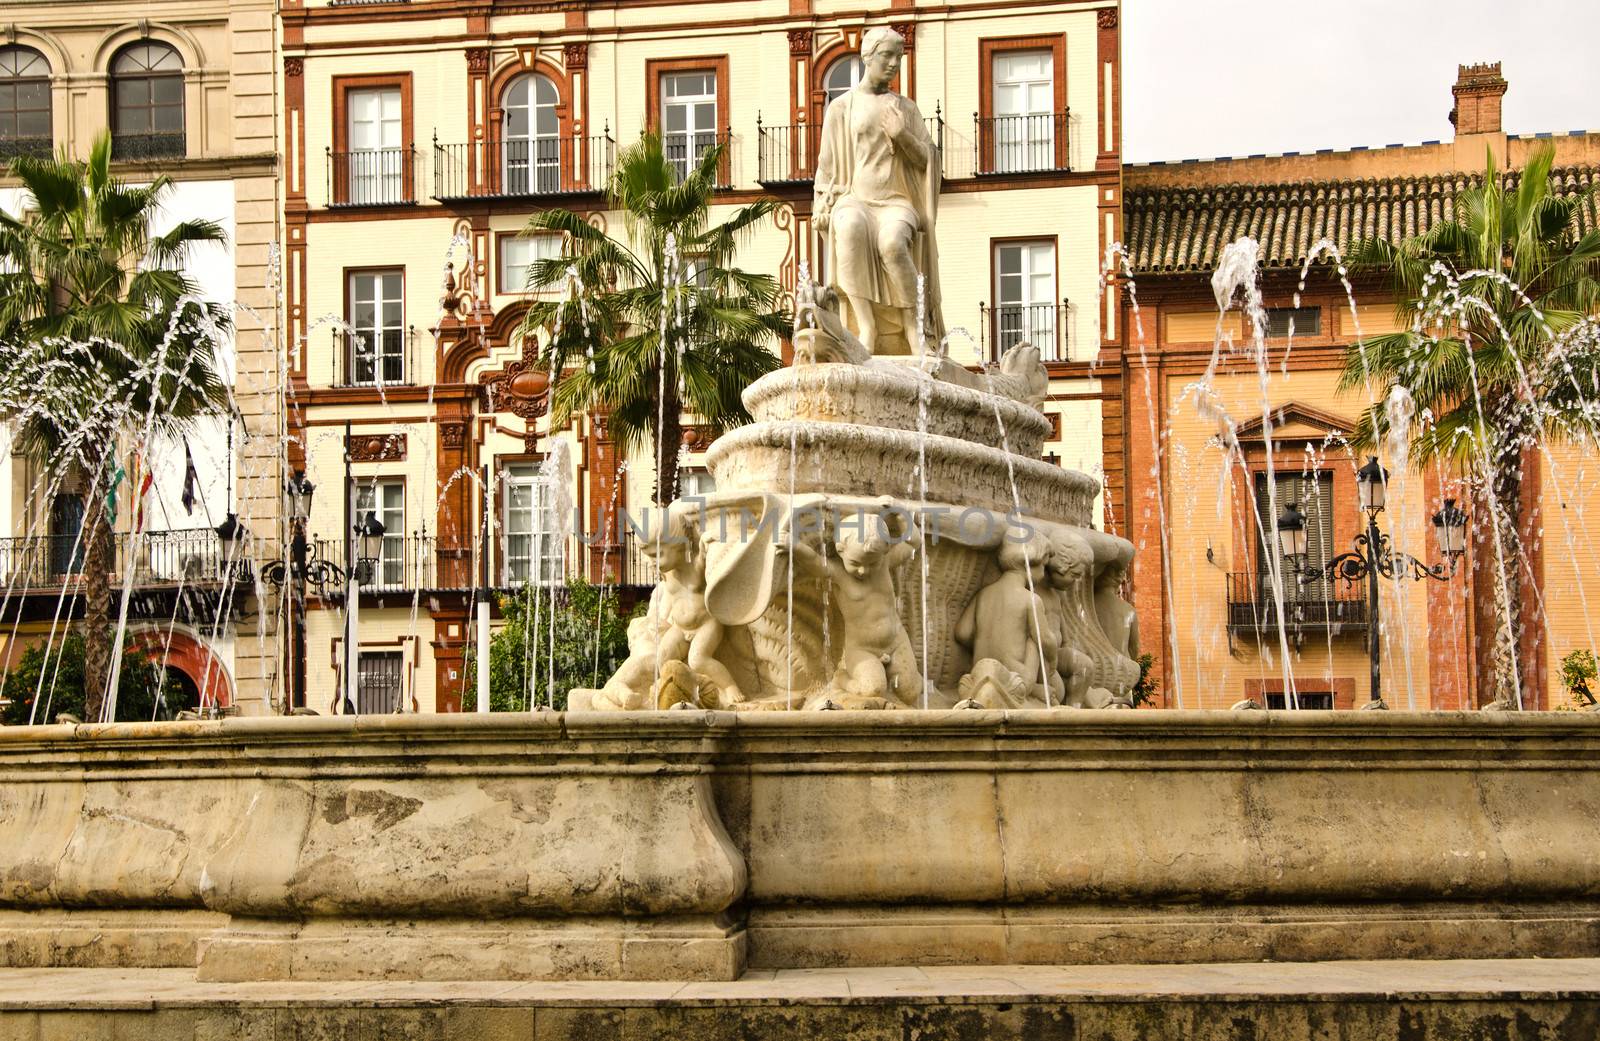 Fountain with sculpture, Seville, Spain. by lauria